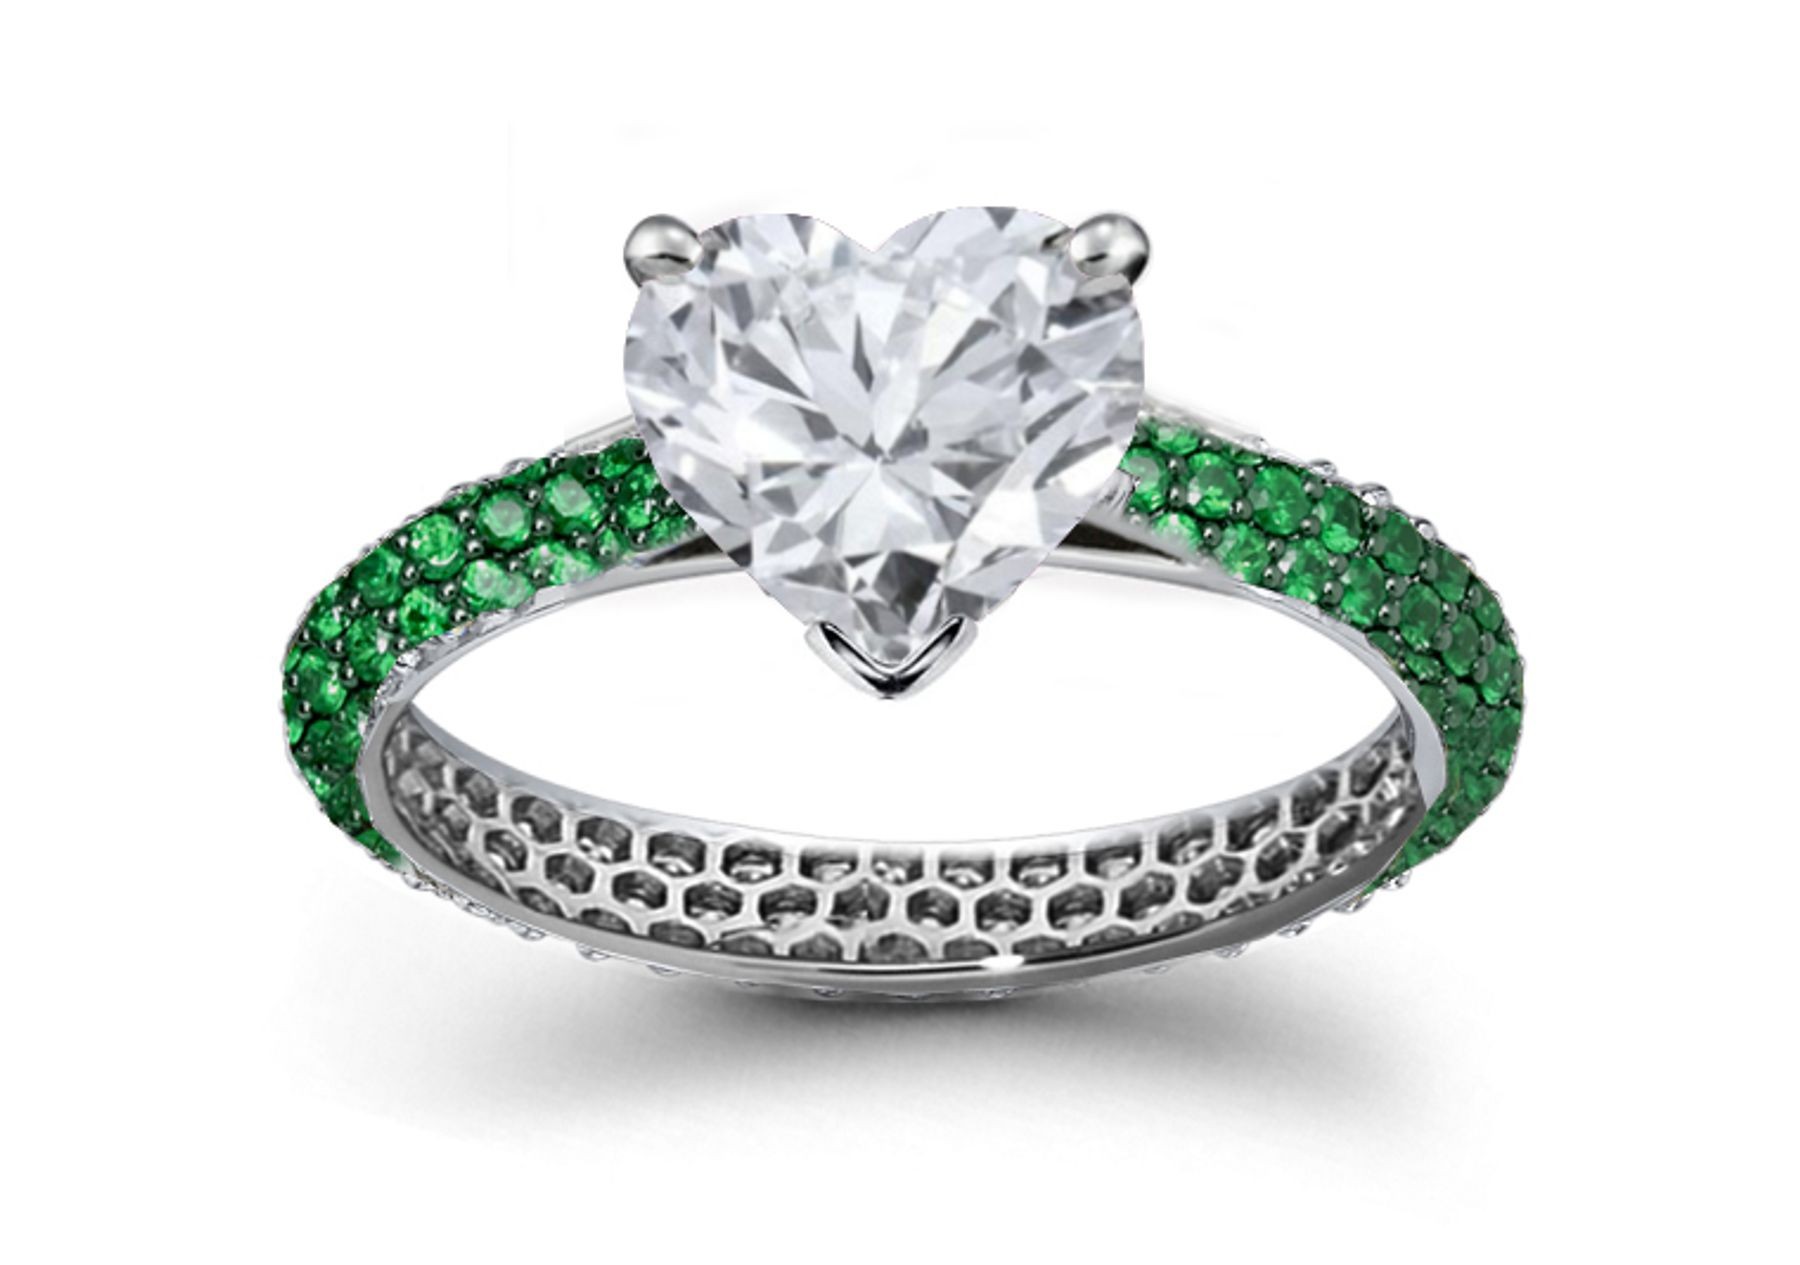 Timeless Creation: Heart Diamond & French Micropav Emerald Encrusted Ring